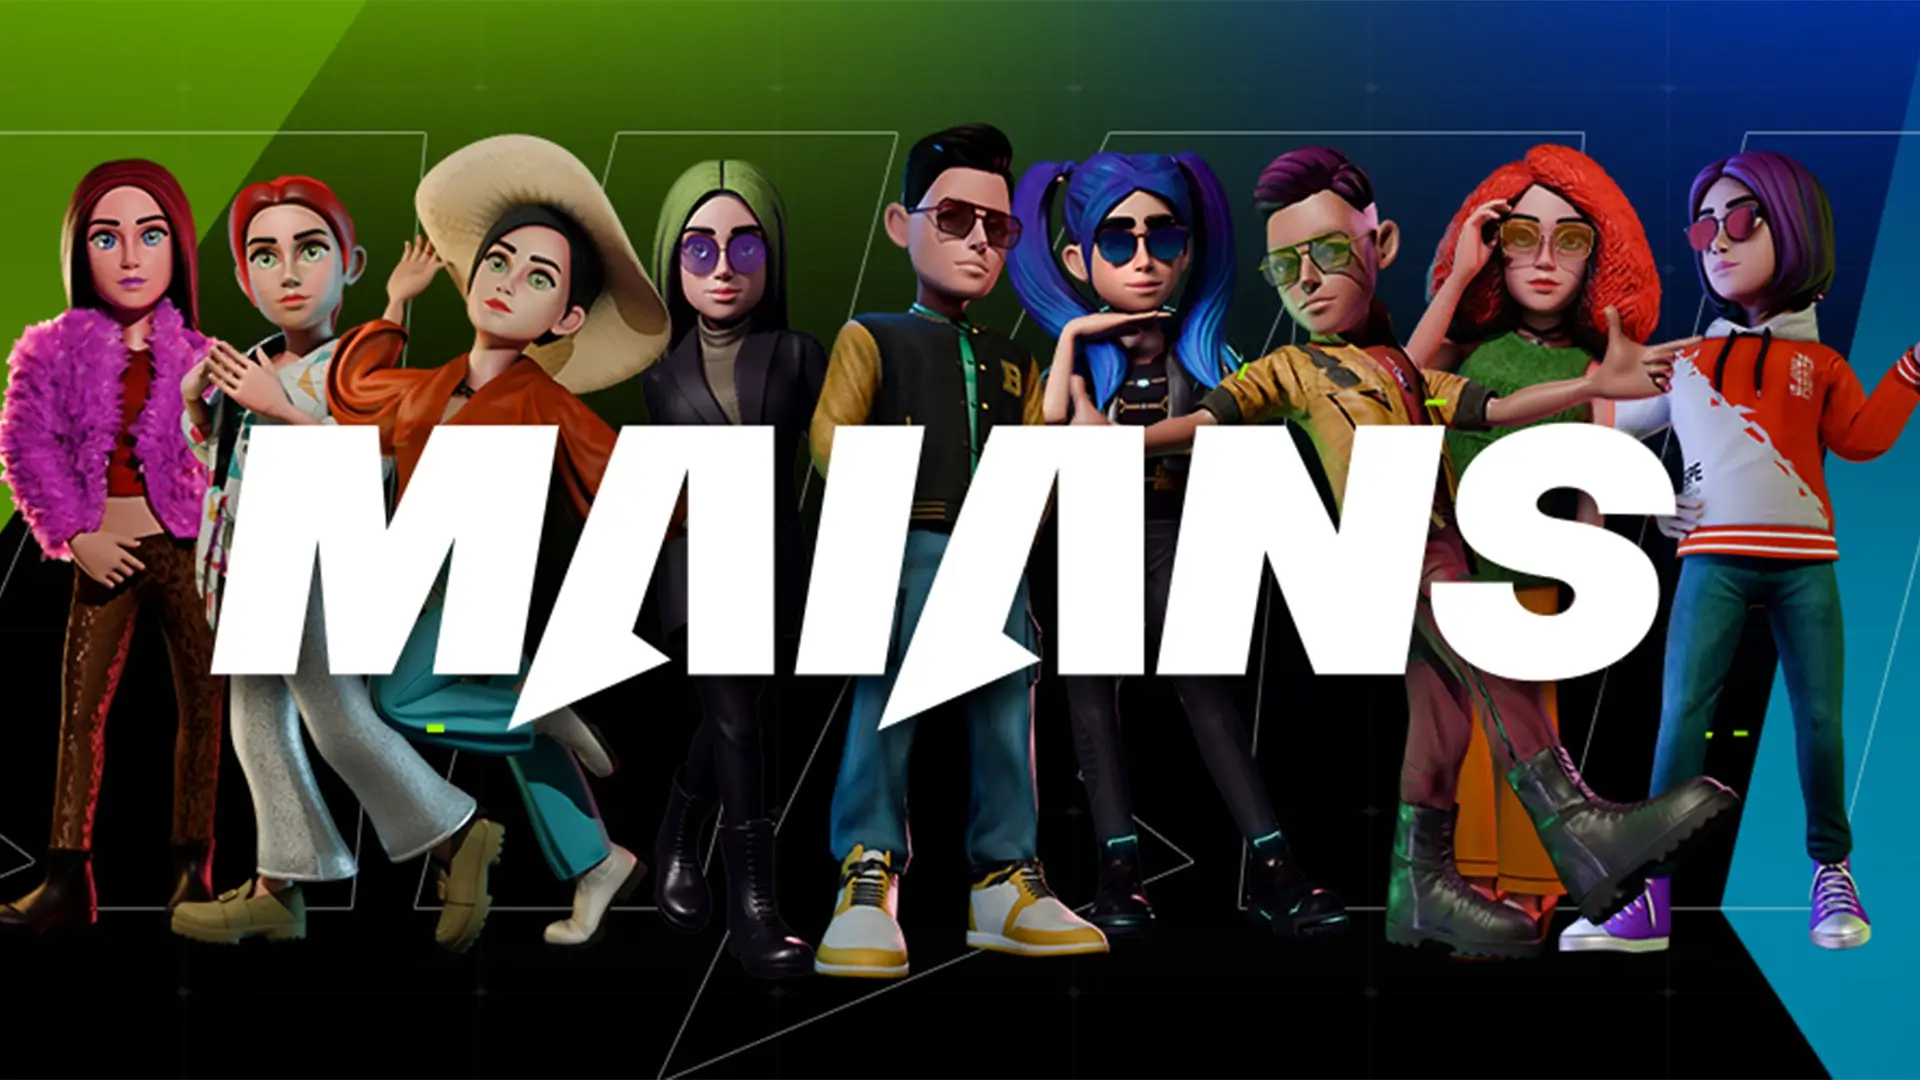 Nine 3D stylized human characters standing in a line, posing in a variety of costumes, with “Maians” written in large white font over the characters.